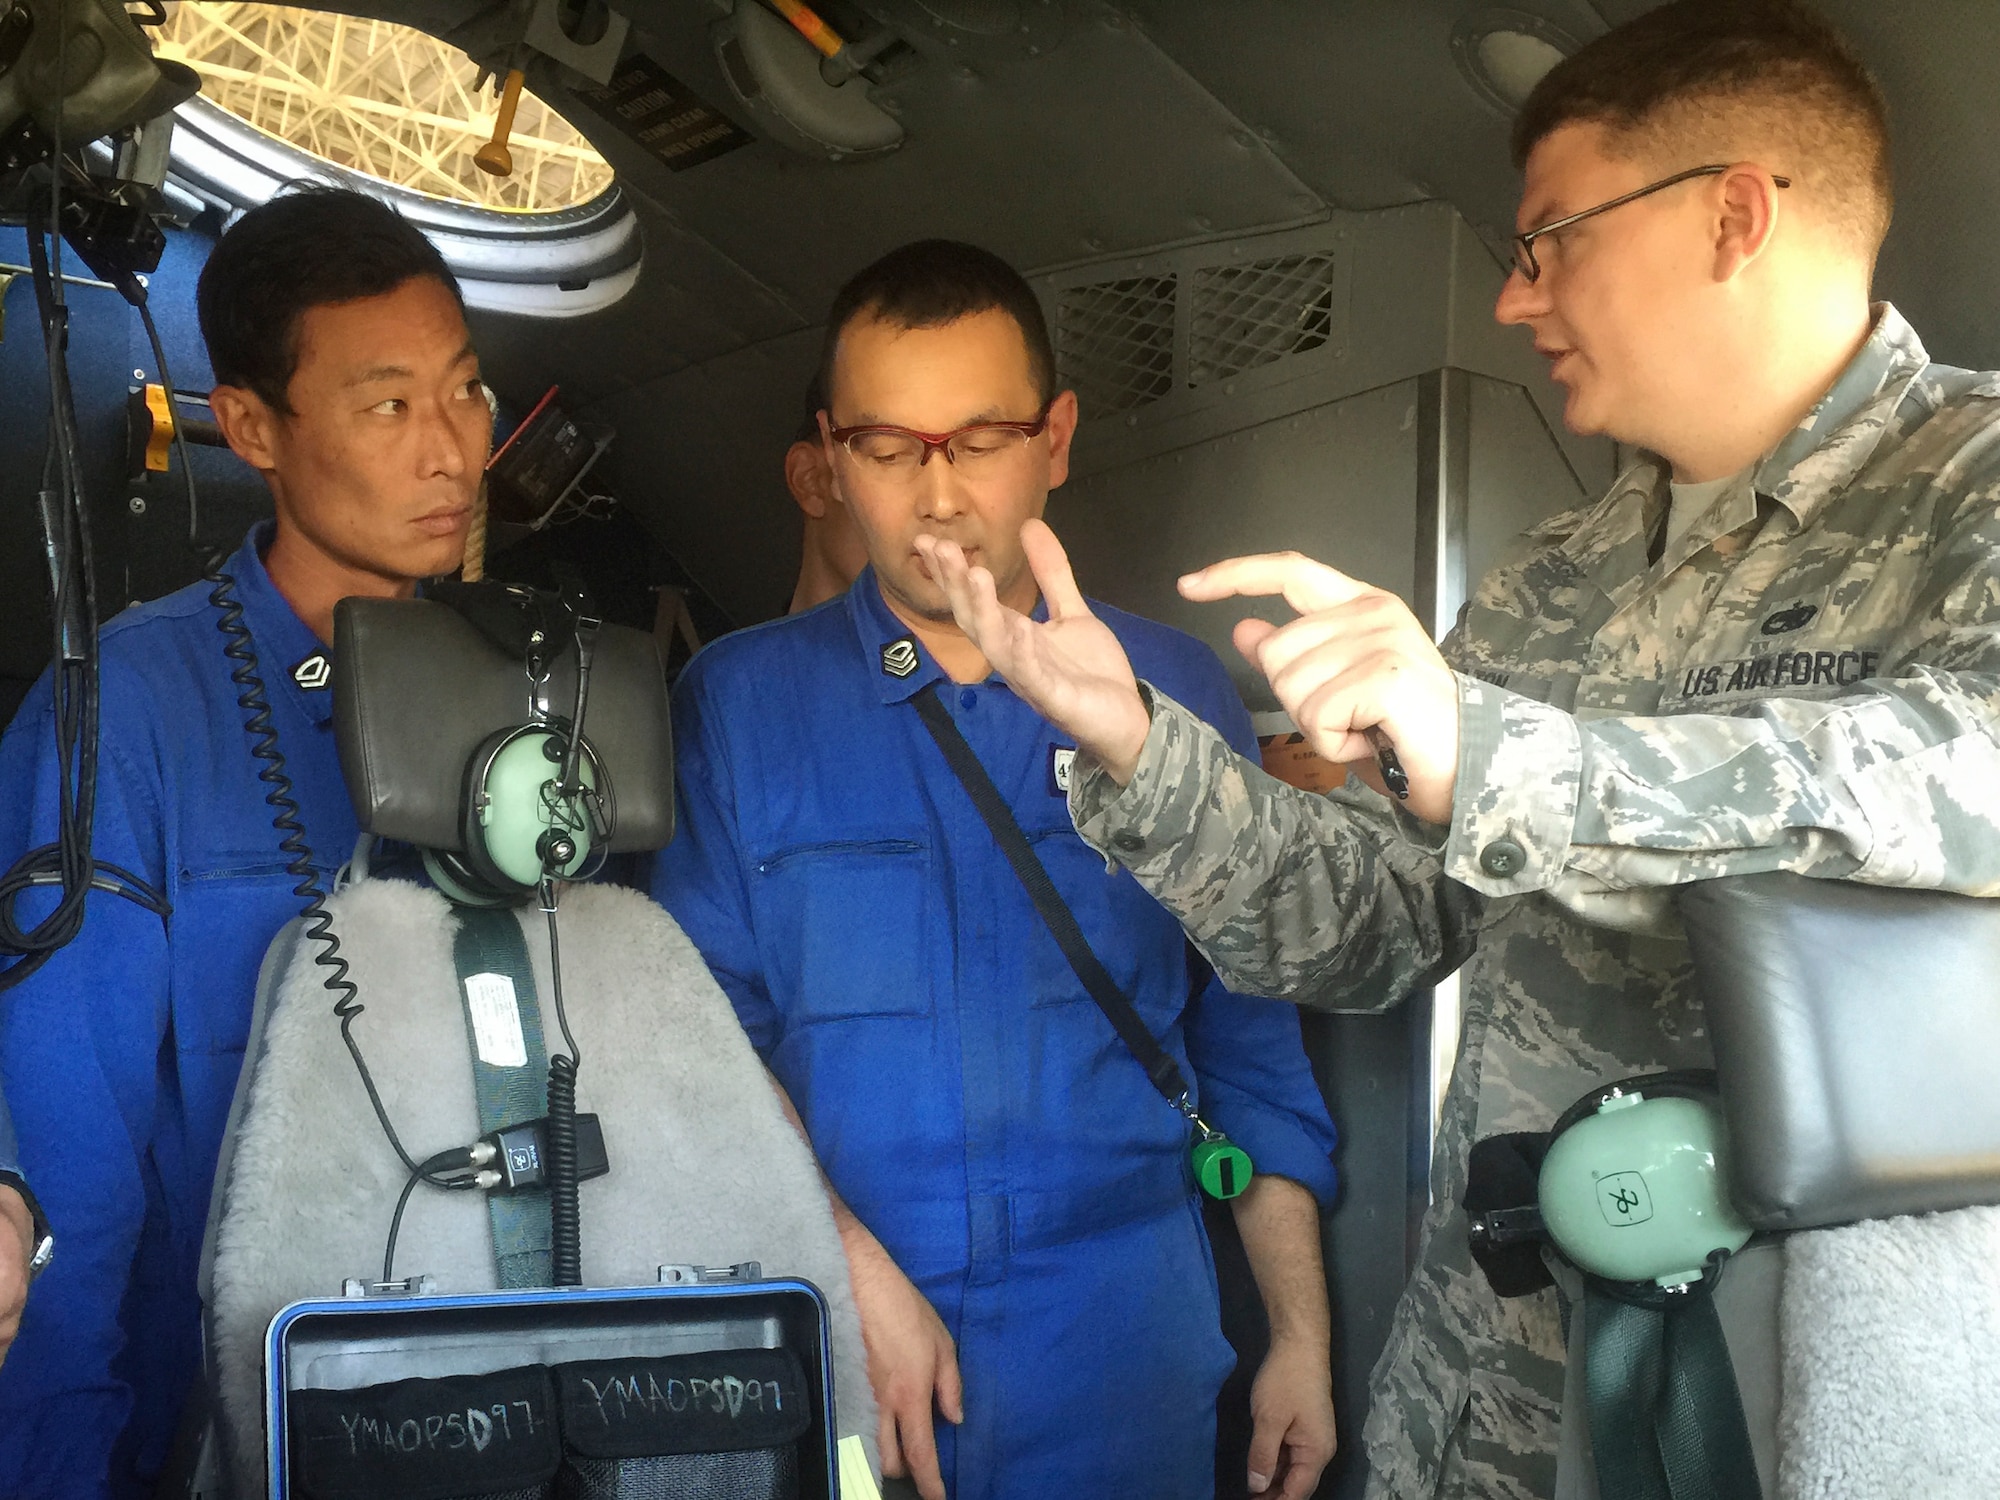 U.S. Air Force Tech. Sgt. Michael S. Hilton, 374th Aircraft Maintenance Squadron instrument and flight control craftsman, speaks with Japan Maritime Self-Defense Force members at Naval Air Facility Atsugi, Japan, Oct. 8, 2015. A total of three technicians flew to the  naval air facility to provide specialized test equipment and training to JMSDF maintenance personnel. (Courtesy photo by 374th Maintenance Group)